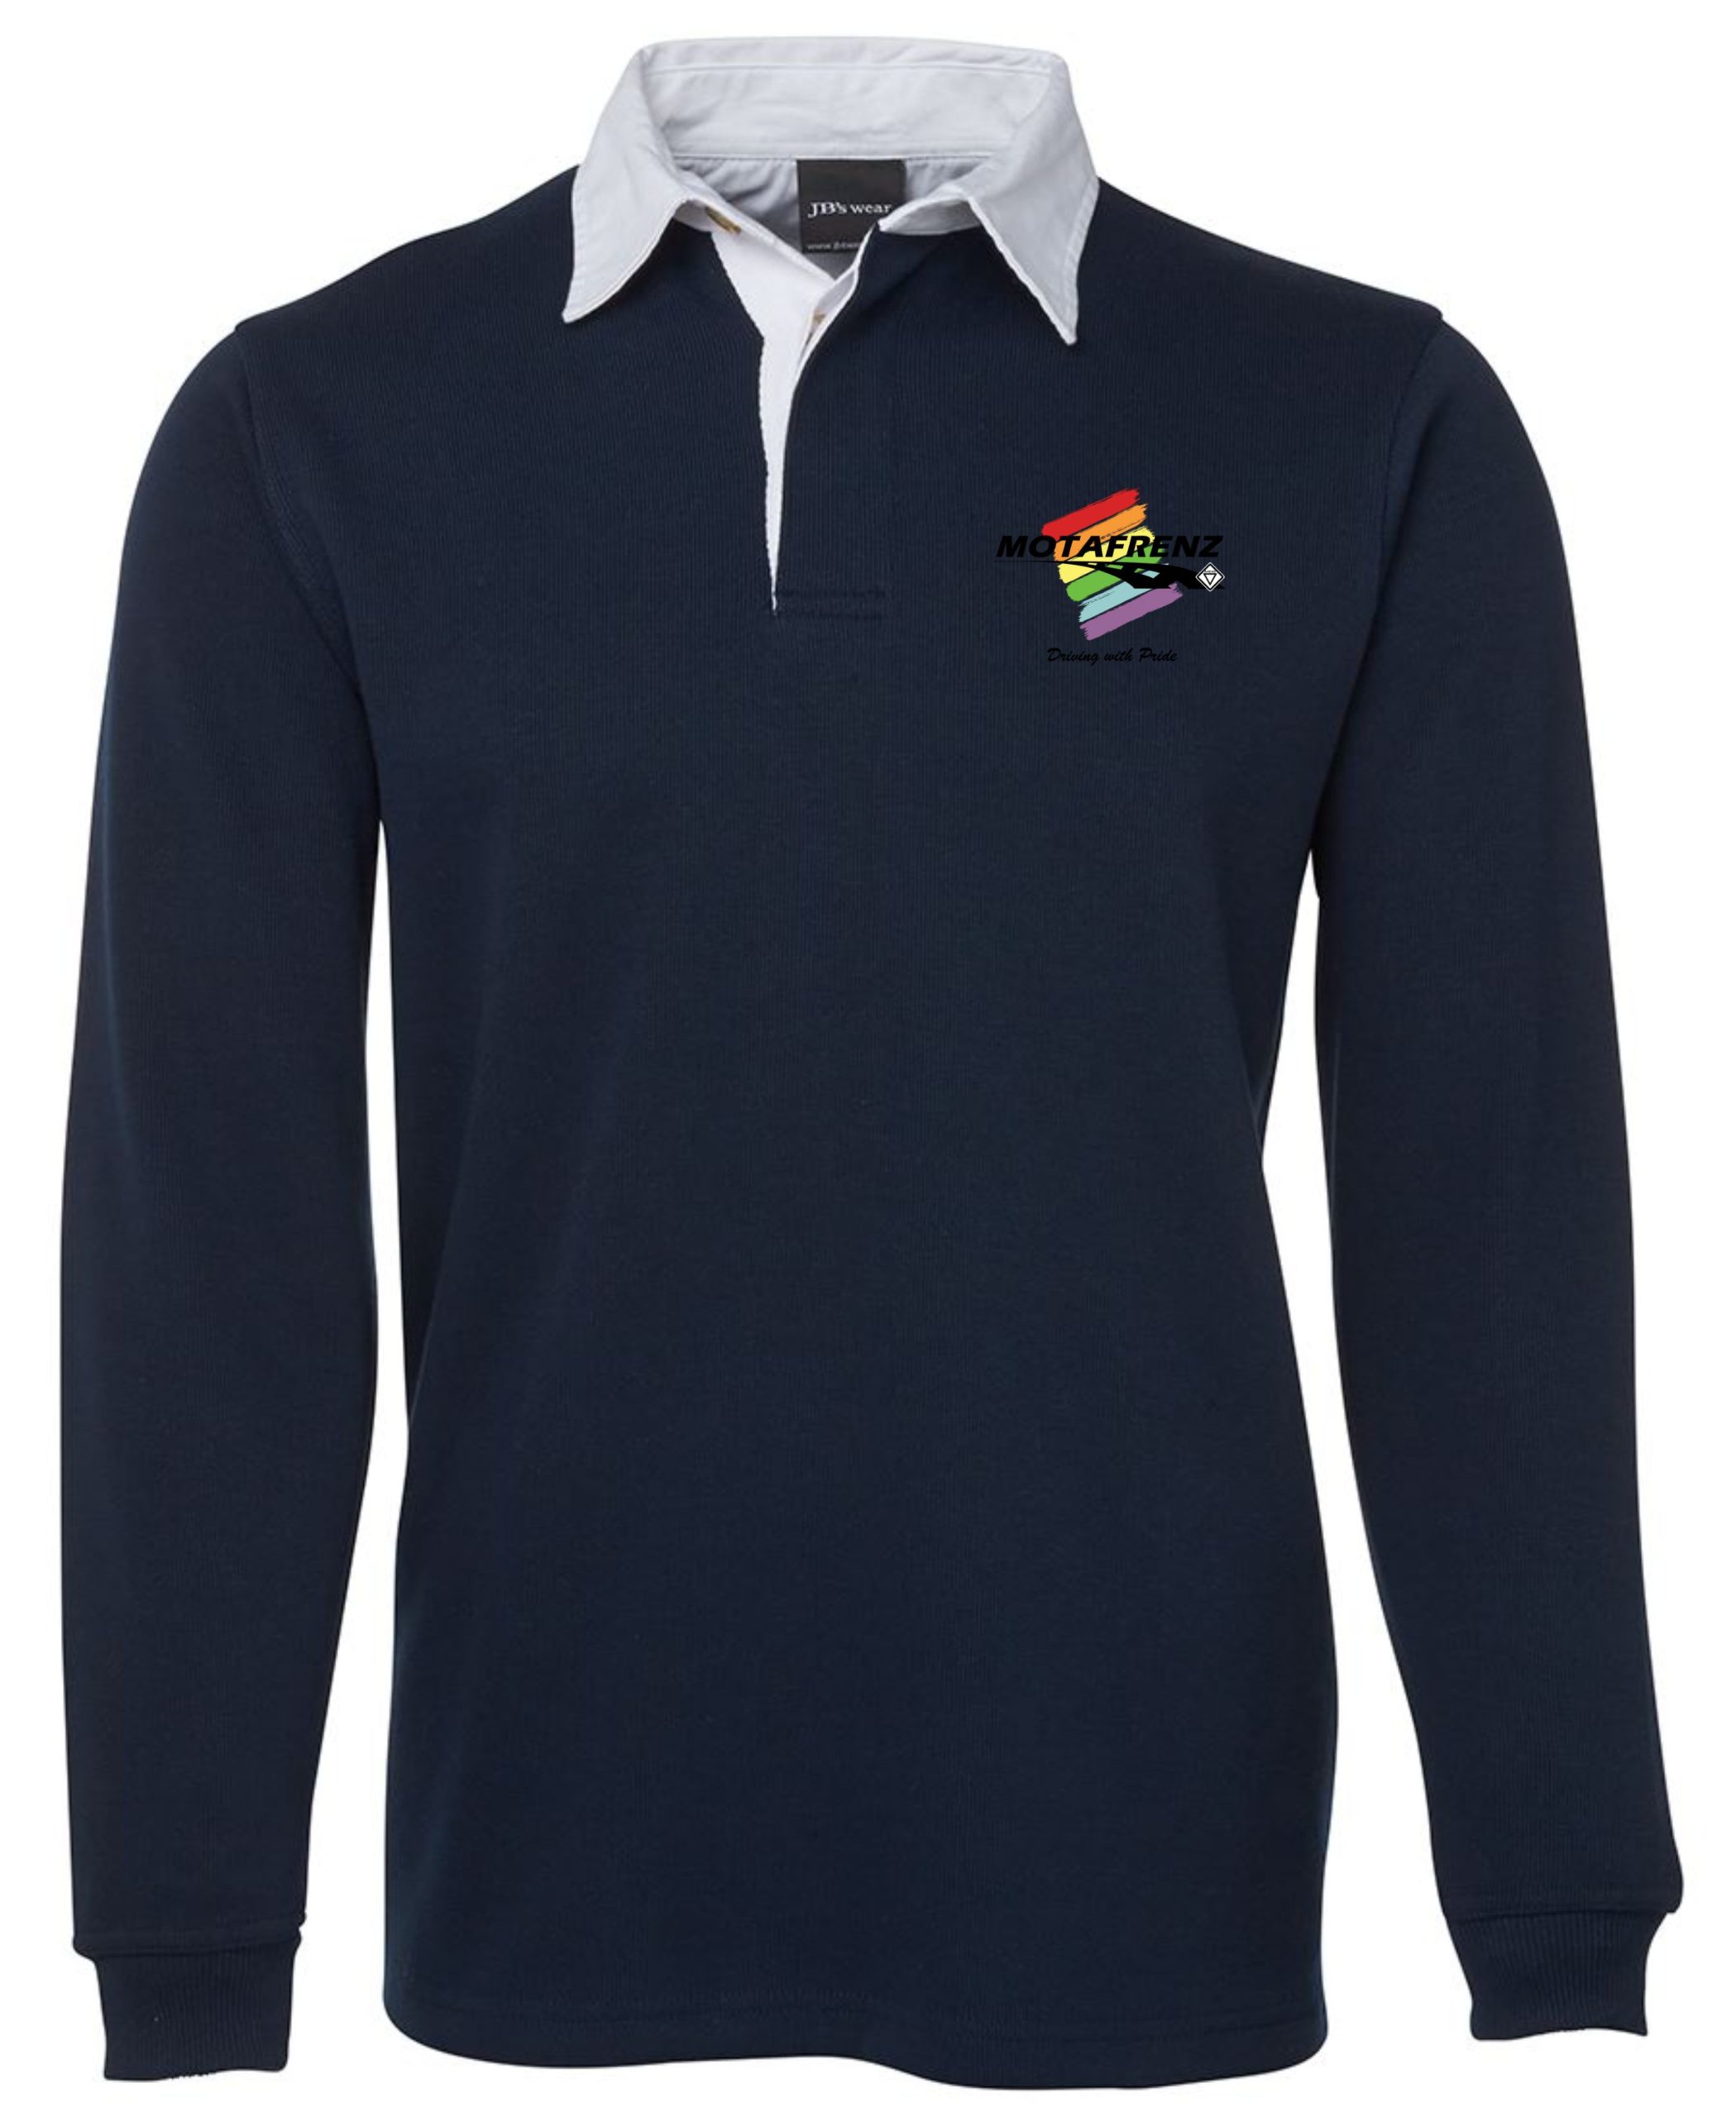 Rugby Top in Navy/White